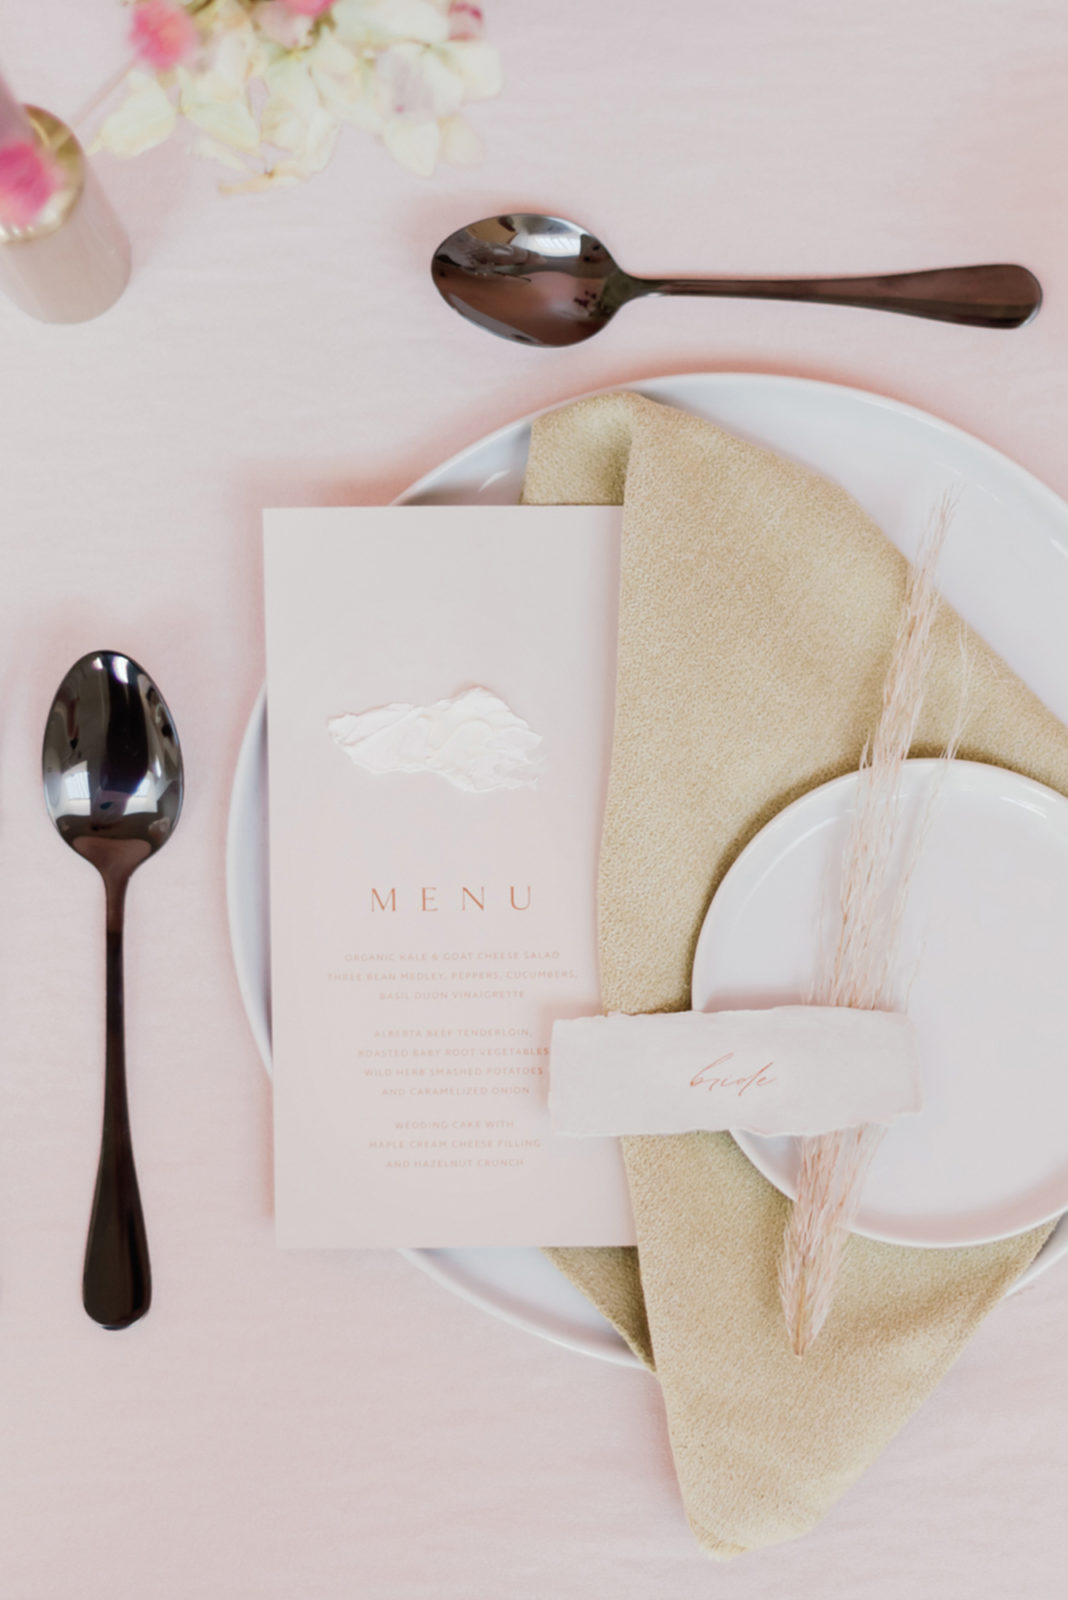 Pink and white wedding menu inspiration for a romantic and feminine wedding style